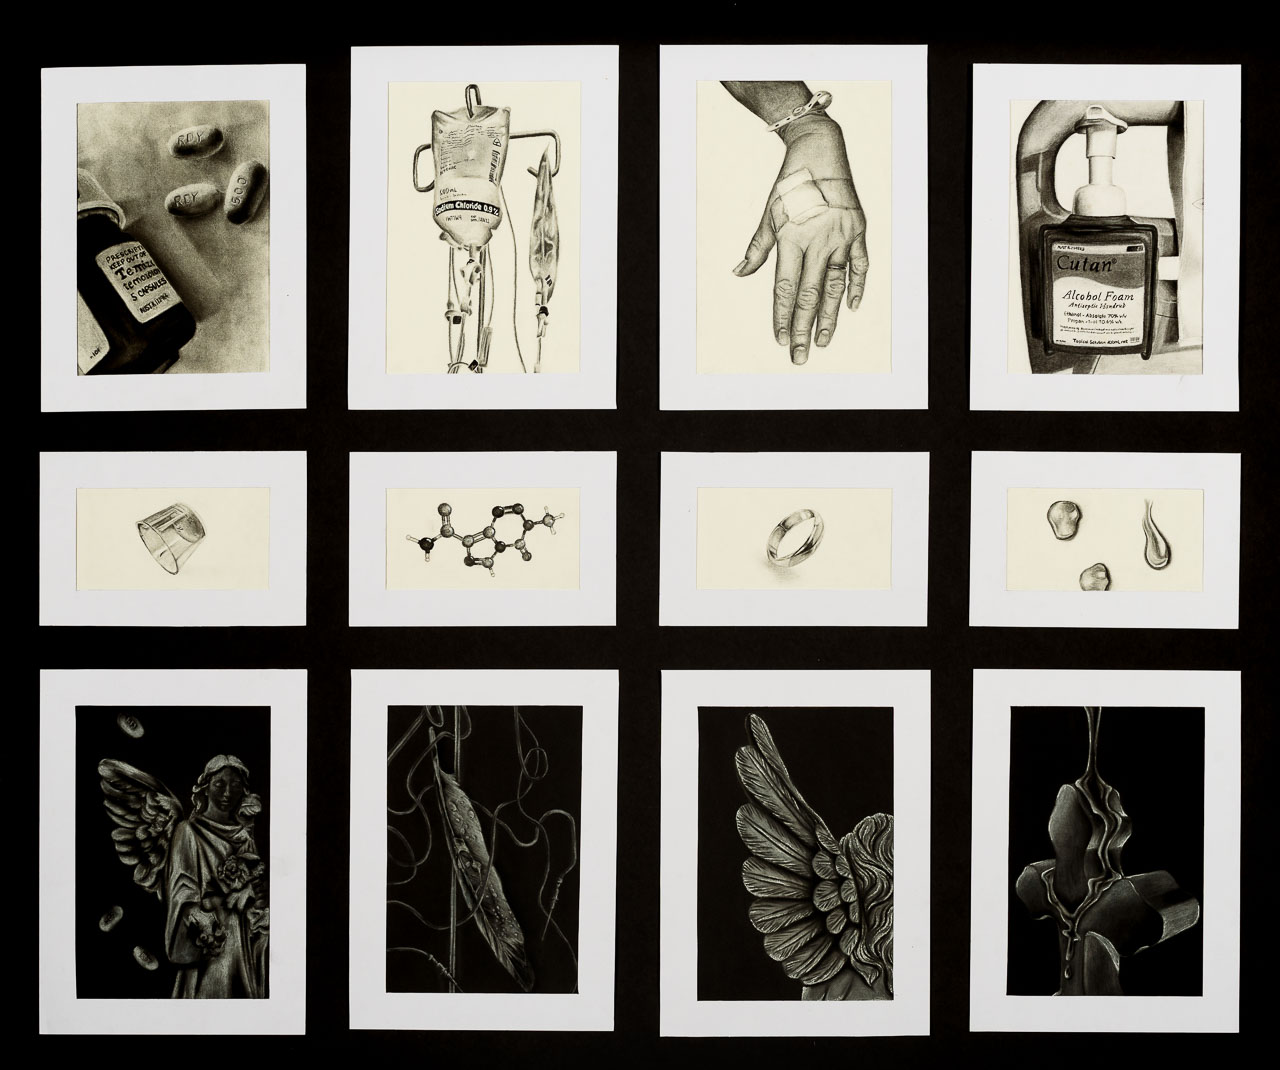 Twelve charcoal drawings of medical objects, human cells and angelic figures.